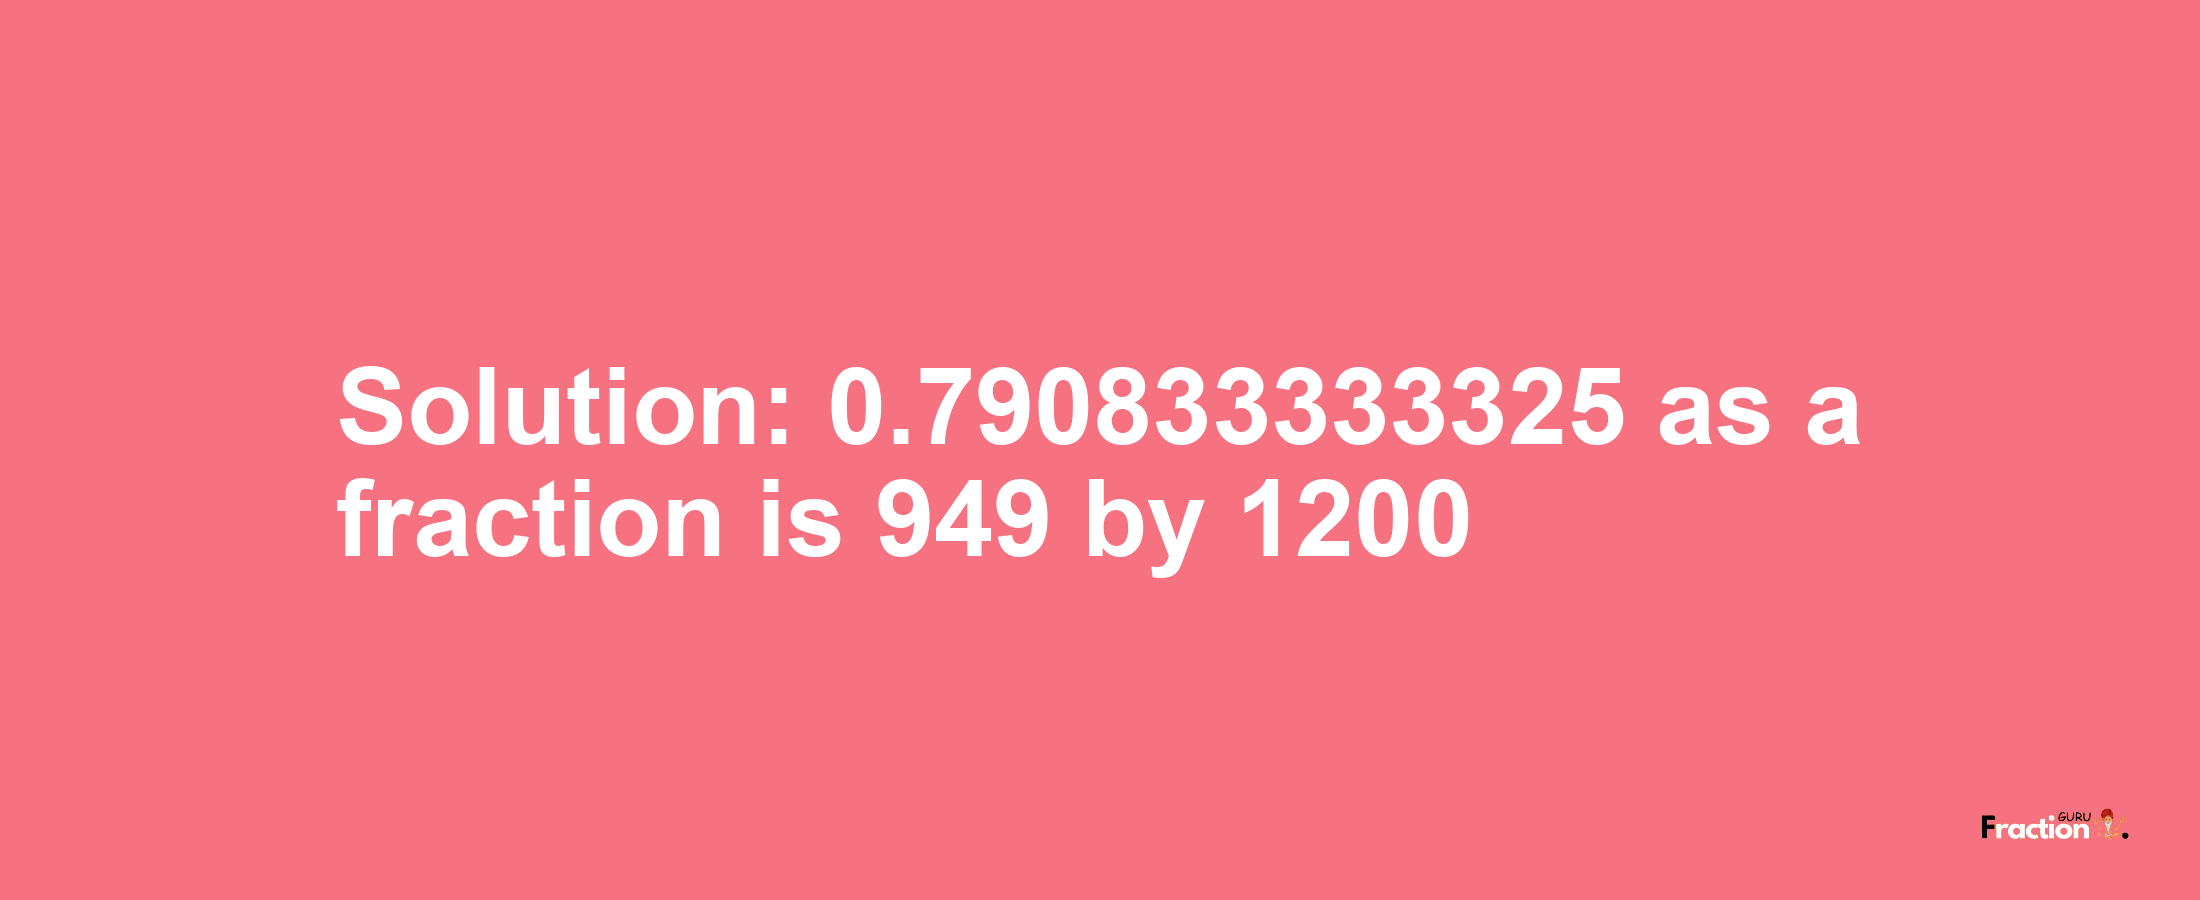 Solution:0.790833333325 as a fraction is 949/1200